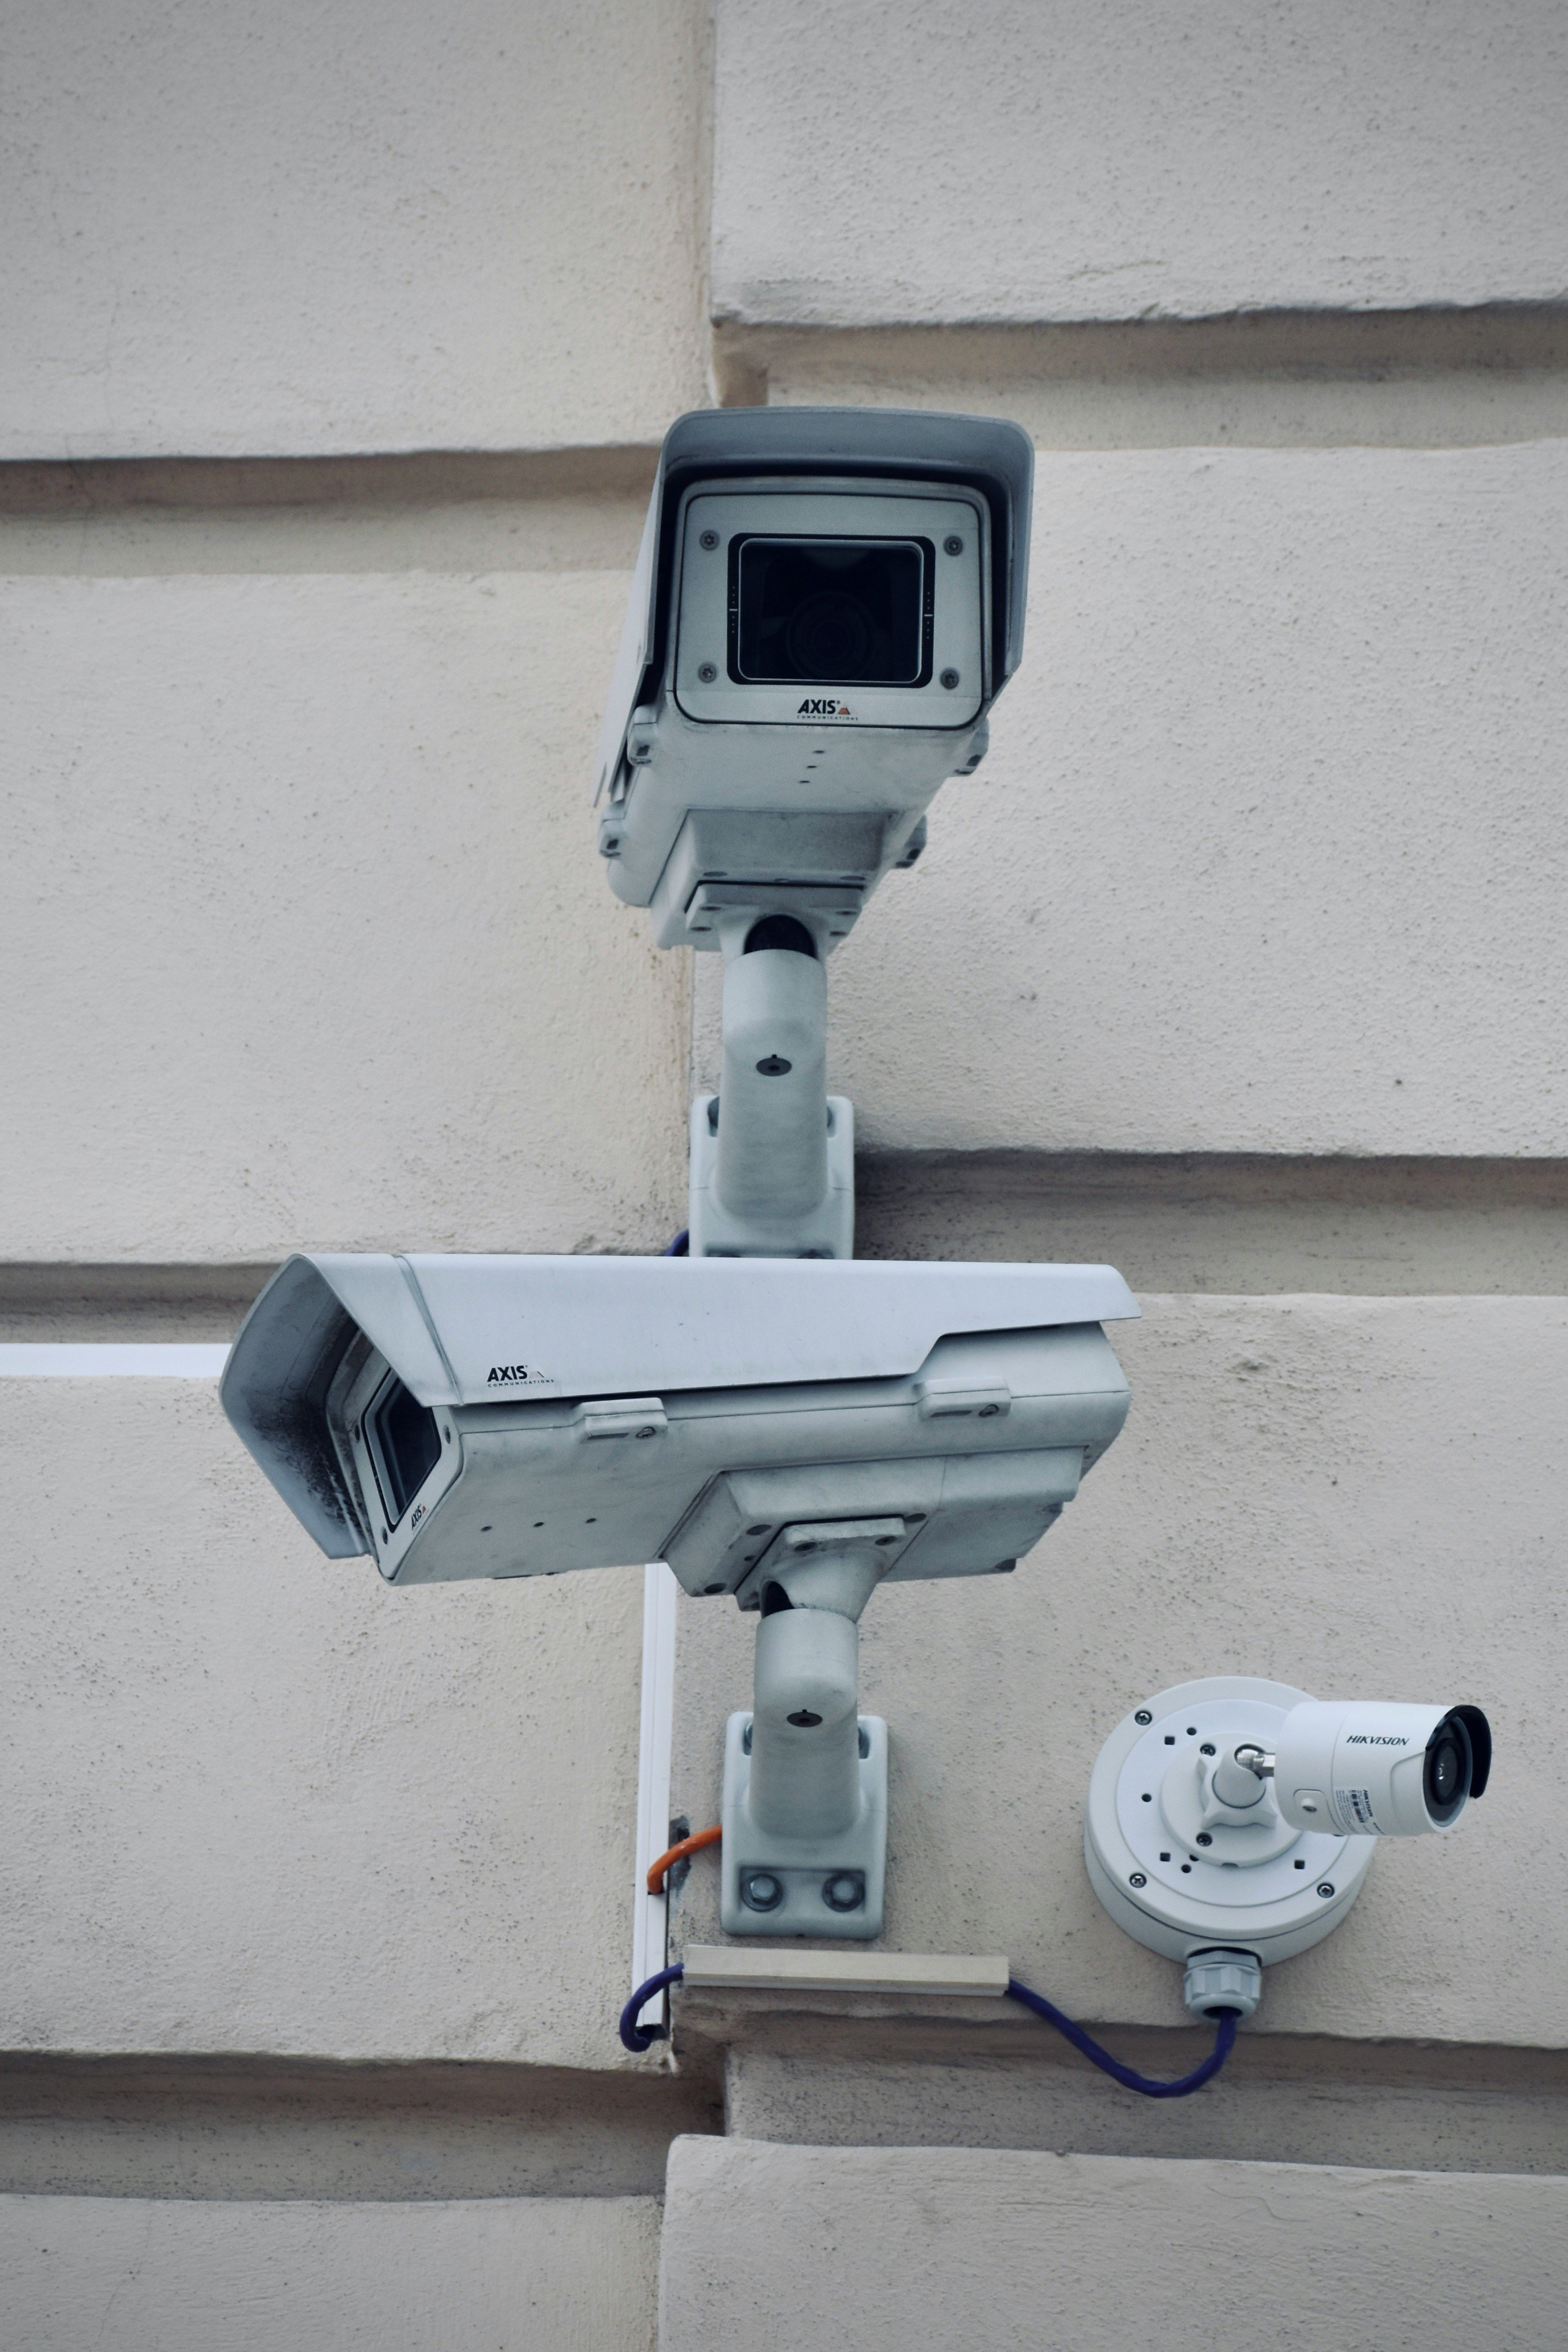 security cameras on a building wall